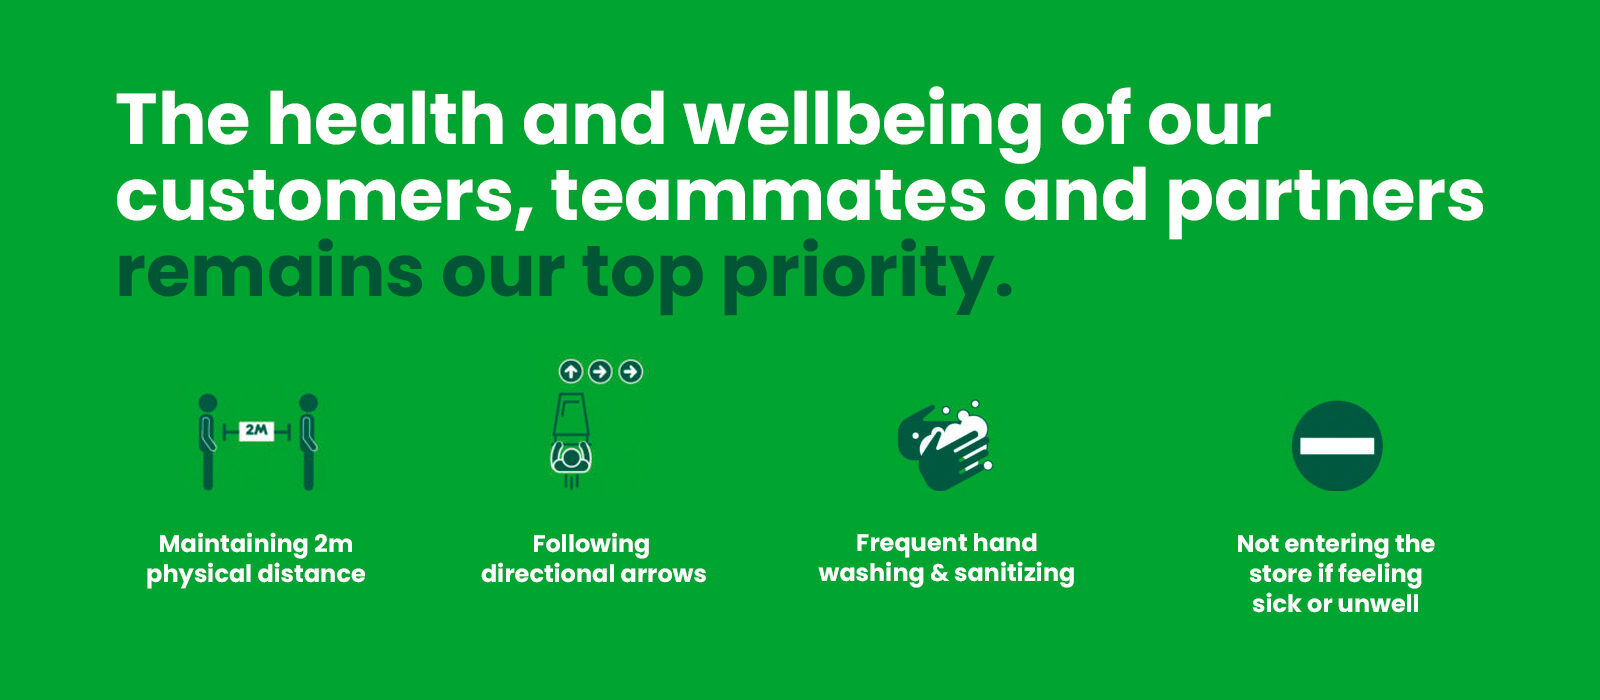 The health and wellbeing of our customers, teammates and partners